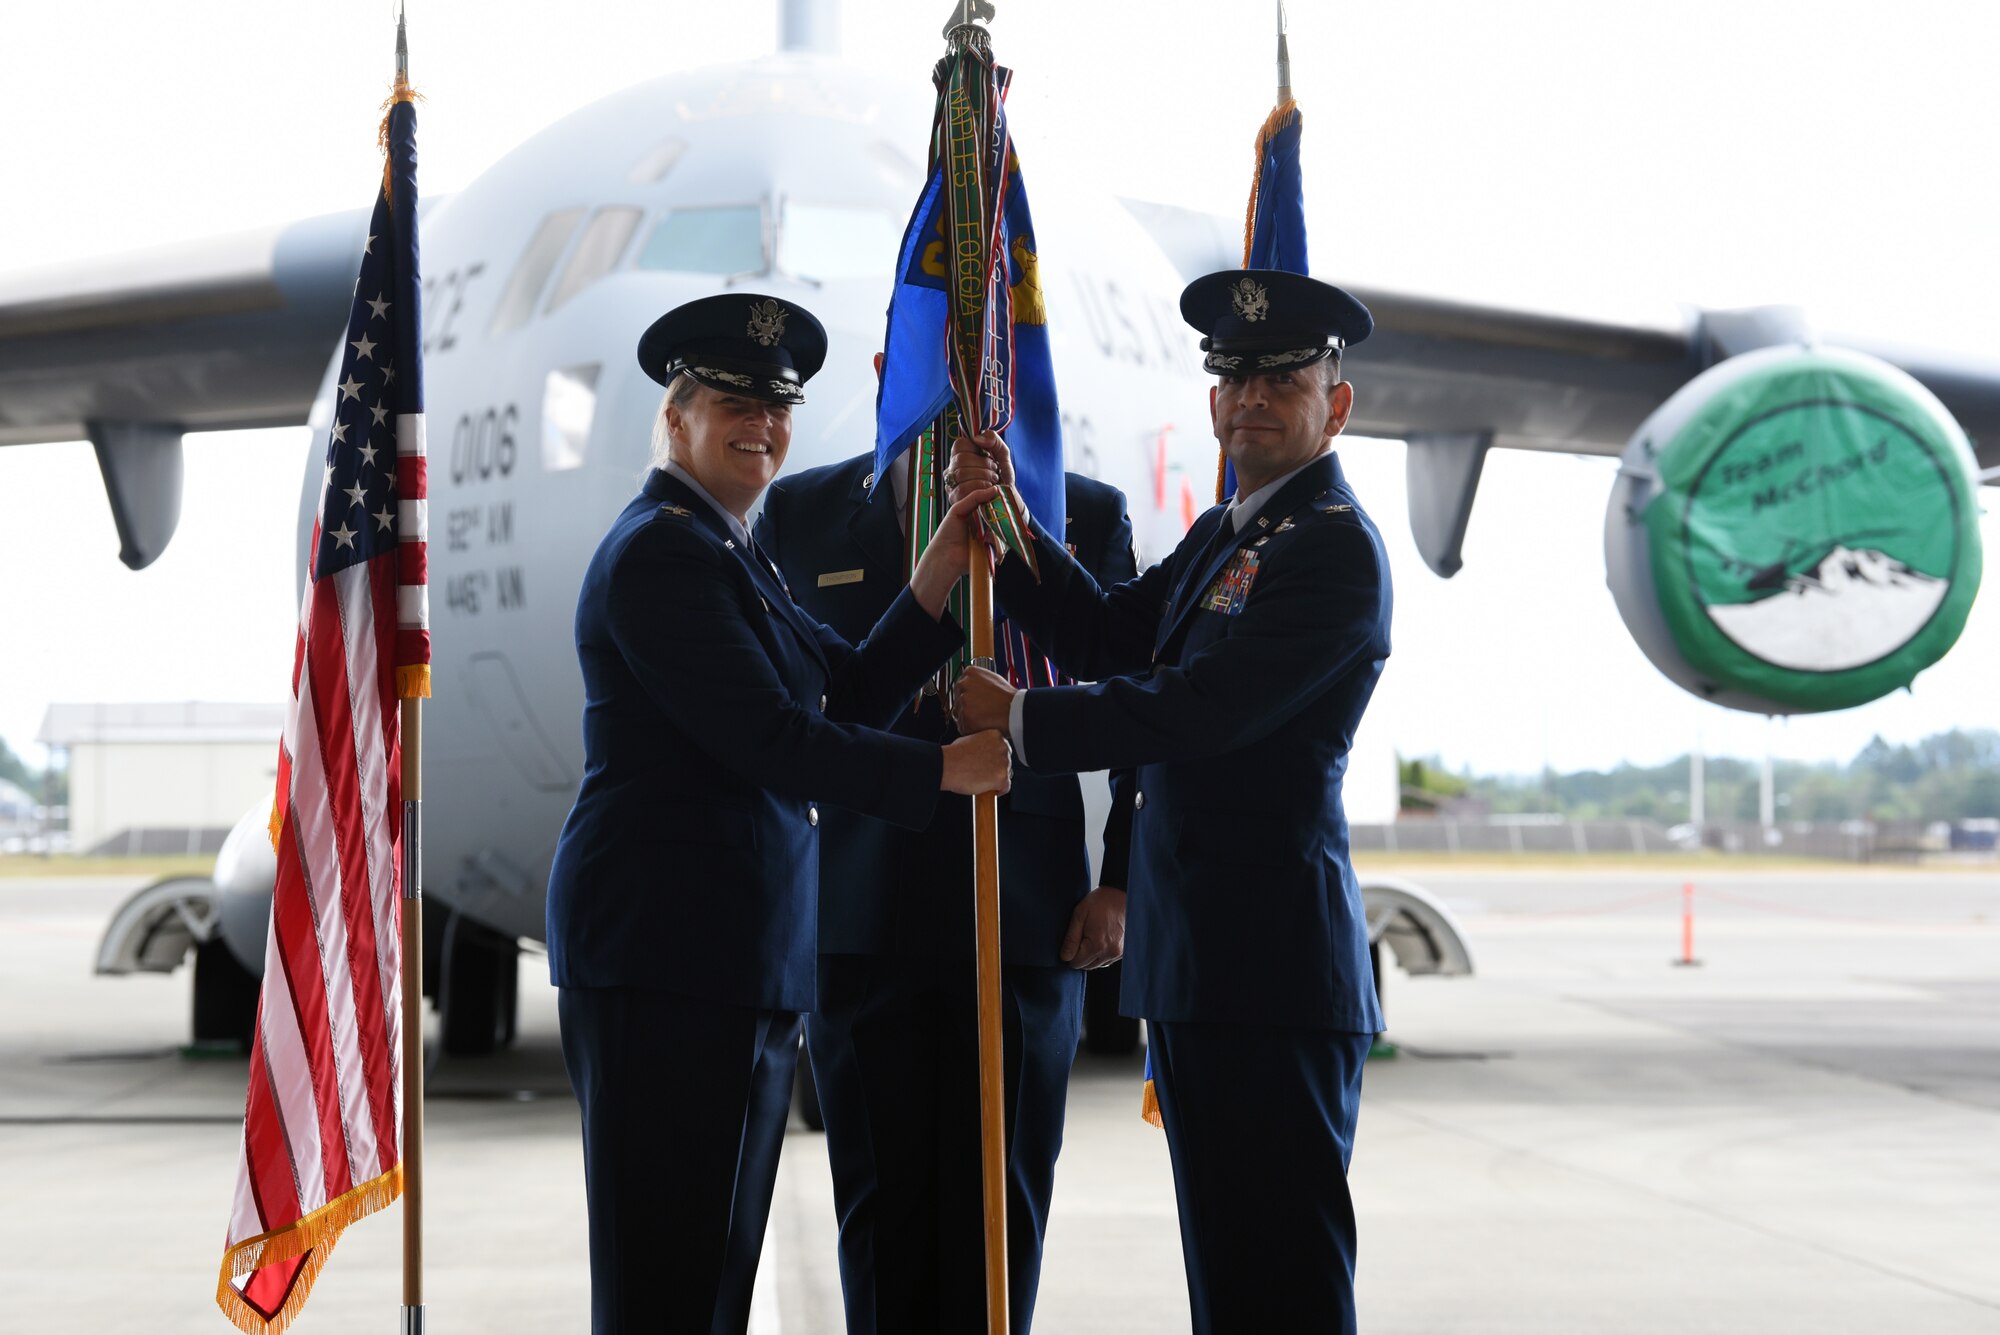 U.S. Air Force Col. Erin Staine-Pyne, 62nd Airlift Wing commander, presents the 62nd Operations Group guidon to Col. Sergio E. Anaya, the new 62nd OG commander, during the group’s assumption of command ceremony at Joint Base Lewis-McChord, Washington, June 7, 2021. As the 62nd OG commander, Anaya ensures the combat readiness of three C-17A Globemaster III airlift squadrons and an operations support squadron to conduct all aspects of C-17 operations. Anaya is a senior pilot with more than 3,800 hours in the C-17 Globemaster III, C-21A, T-1 Jayhawk, and T-37 Tweet aircraft and has logged more than 930 combat hours. (U.S. Air Force photo by Senior Airman Zoe Thacker)